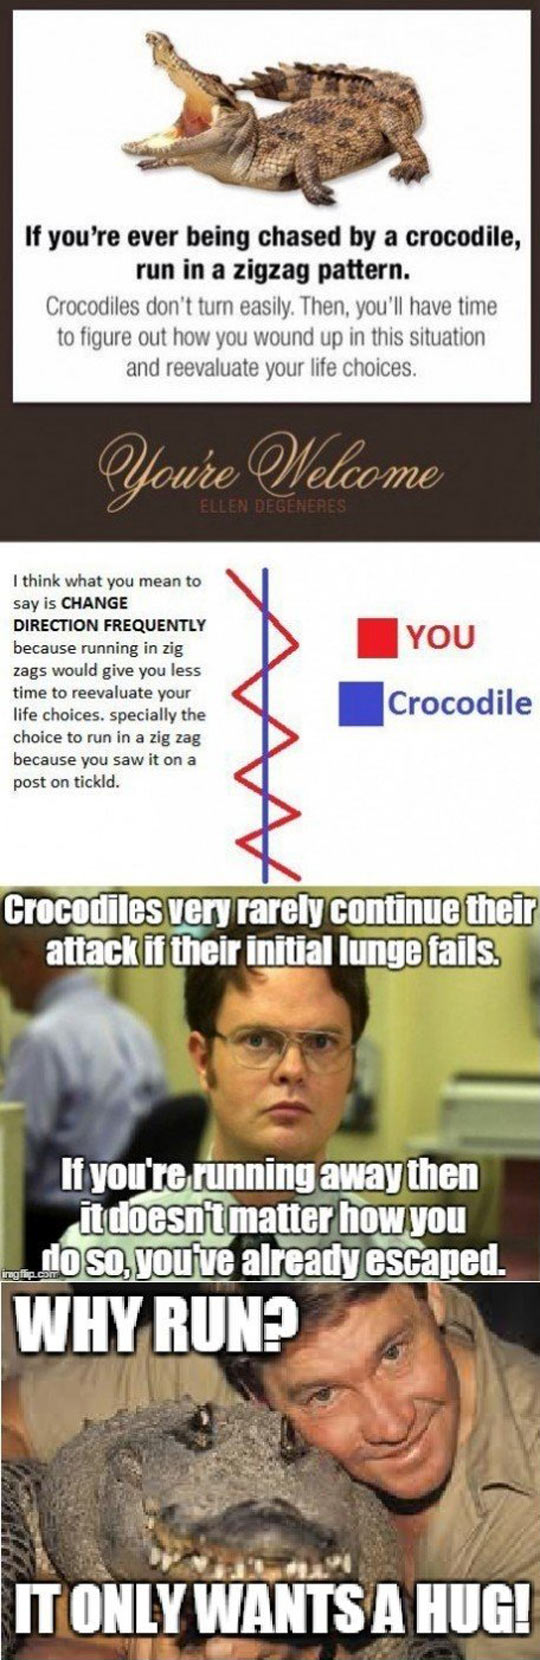 If you're ever chased by a crocodile...